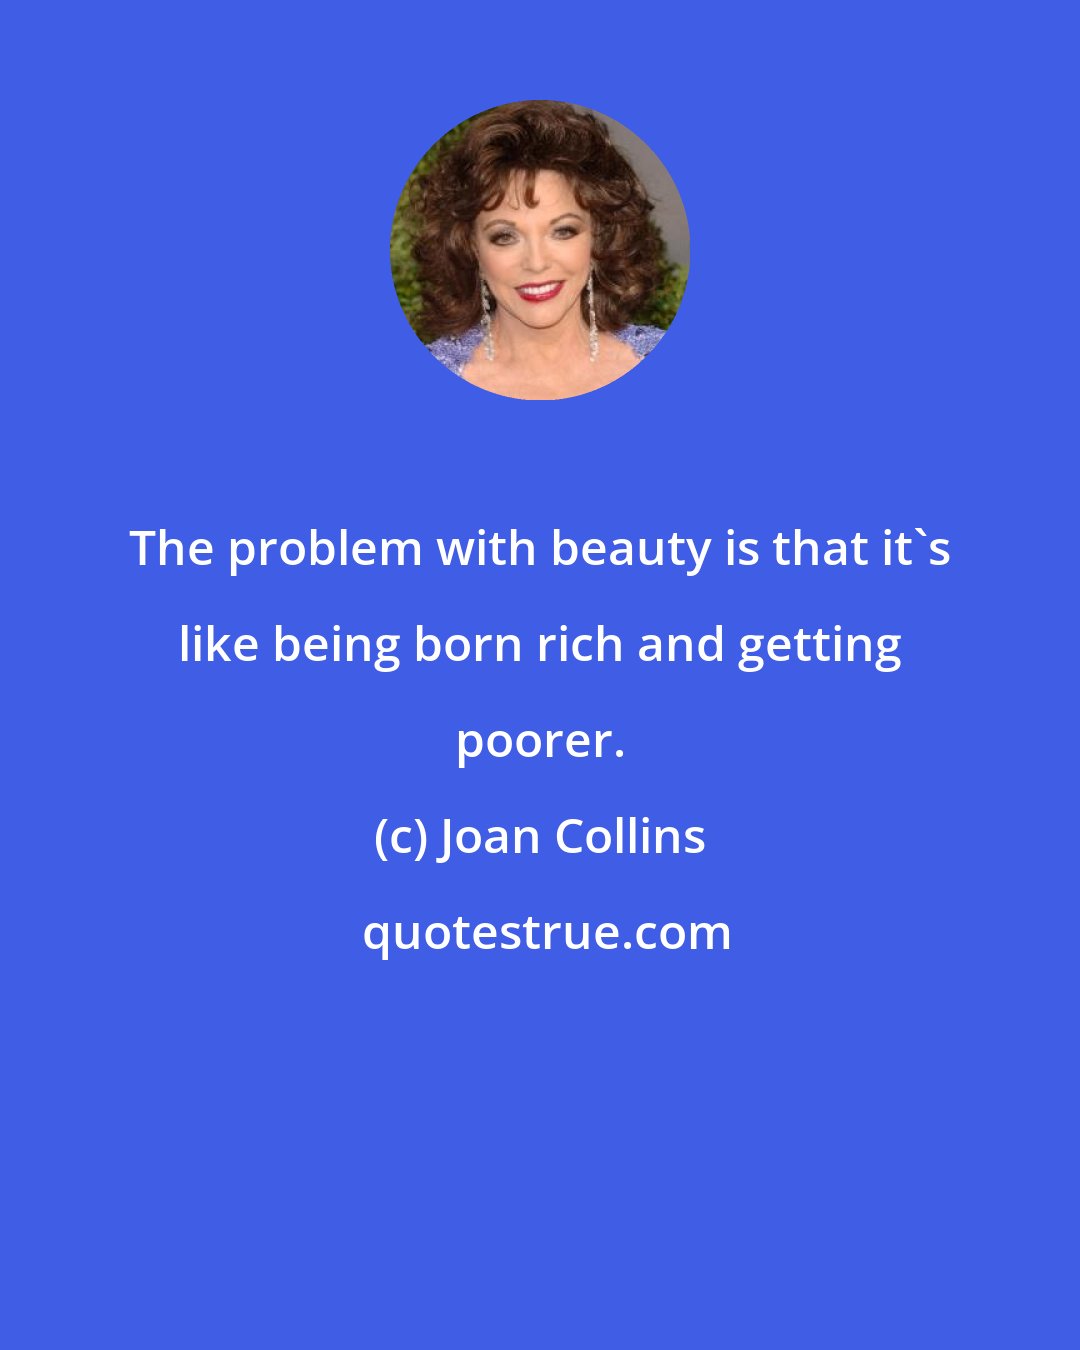 Joan Collins: The problem with beauty is that it's like being born rich and getting poorer.